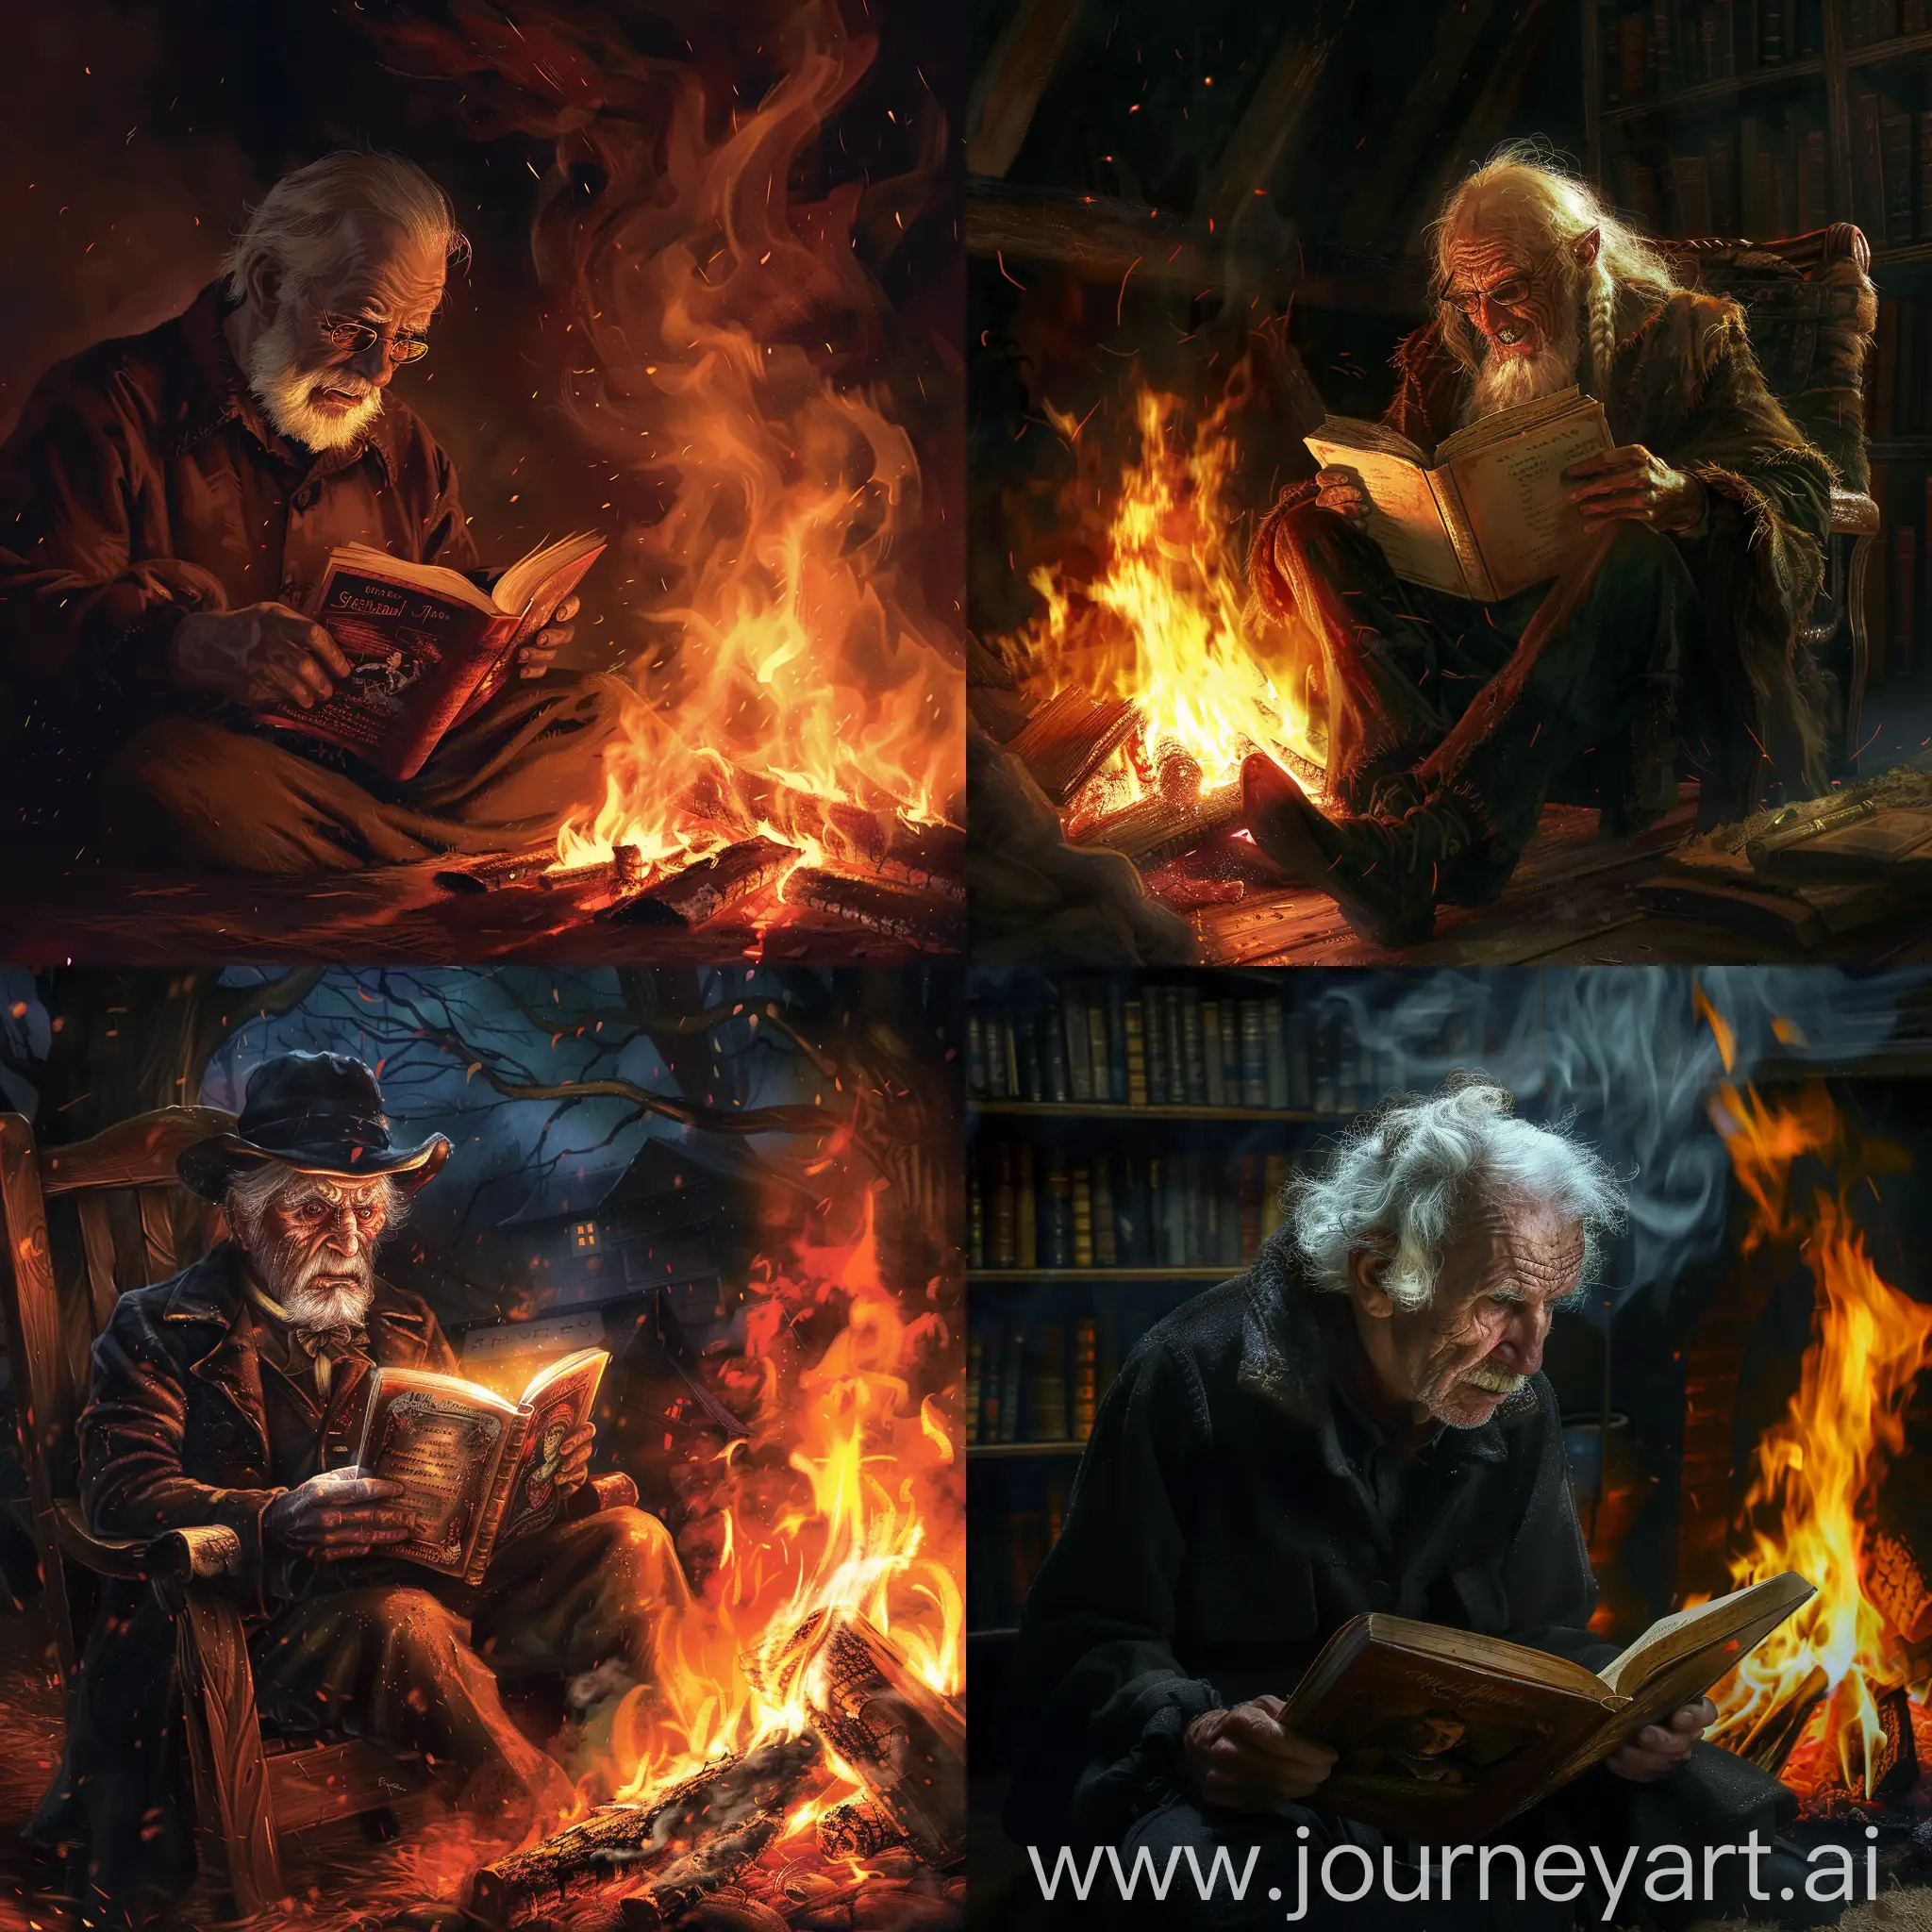 A creepy old man reading a story by a roaring fire